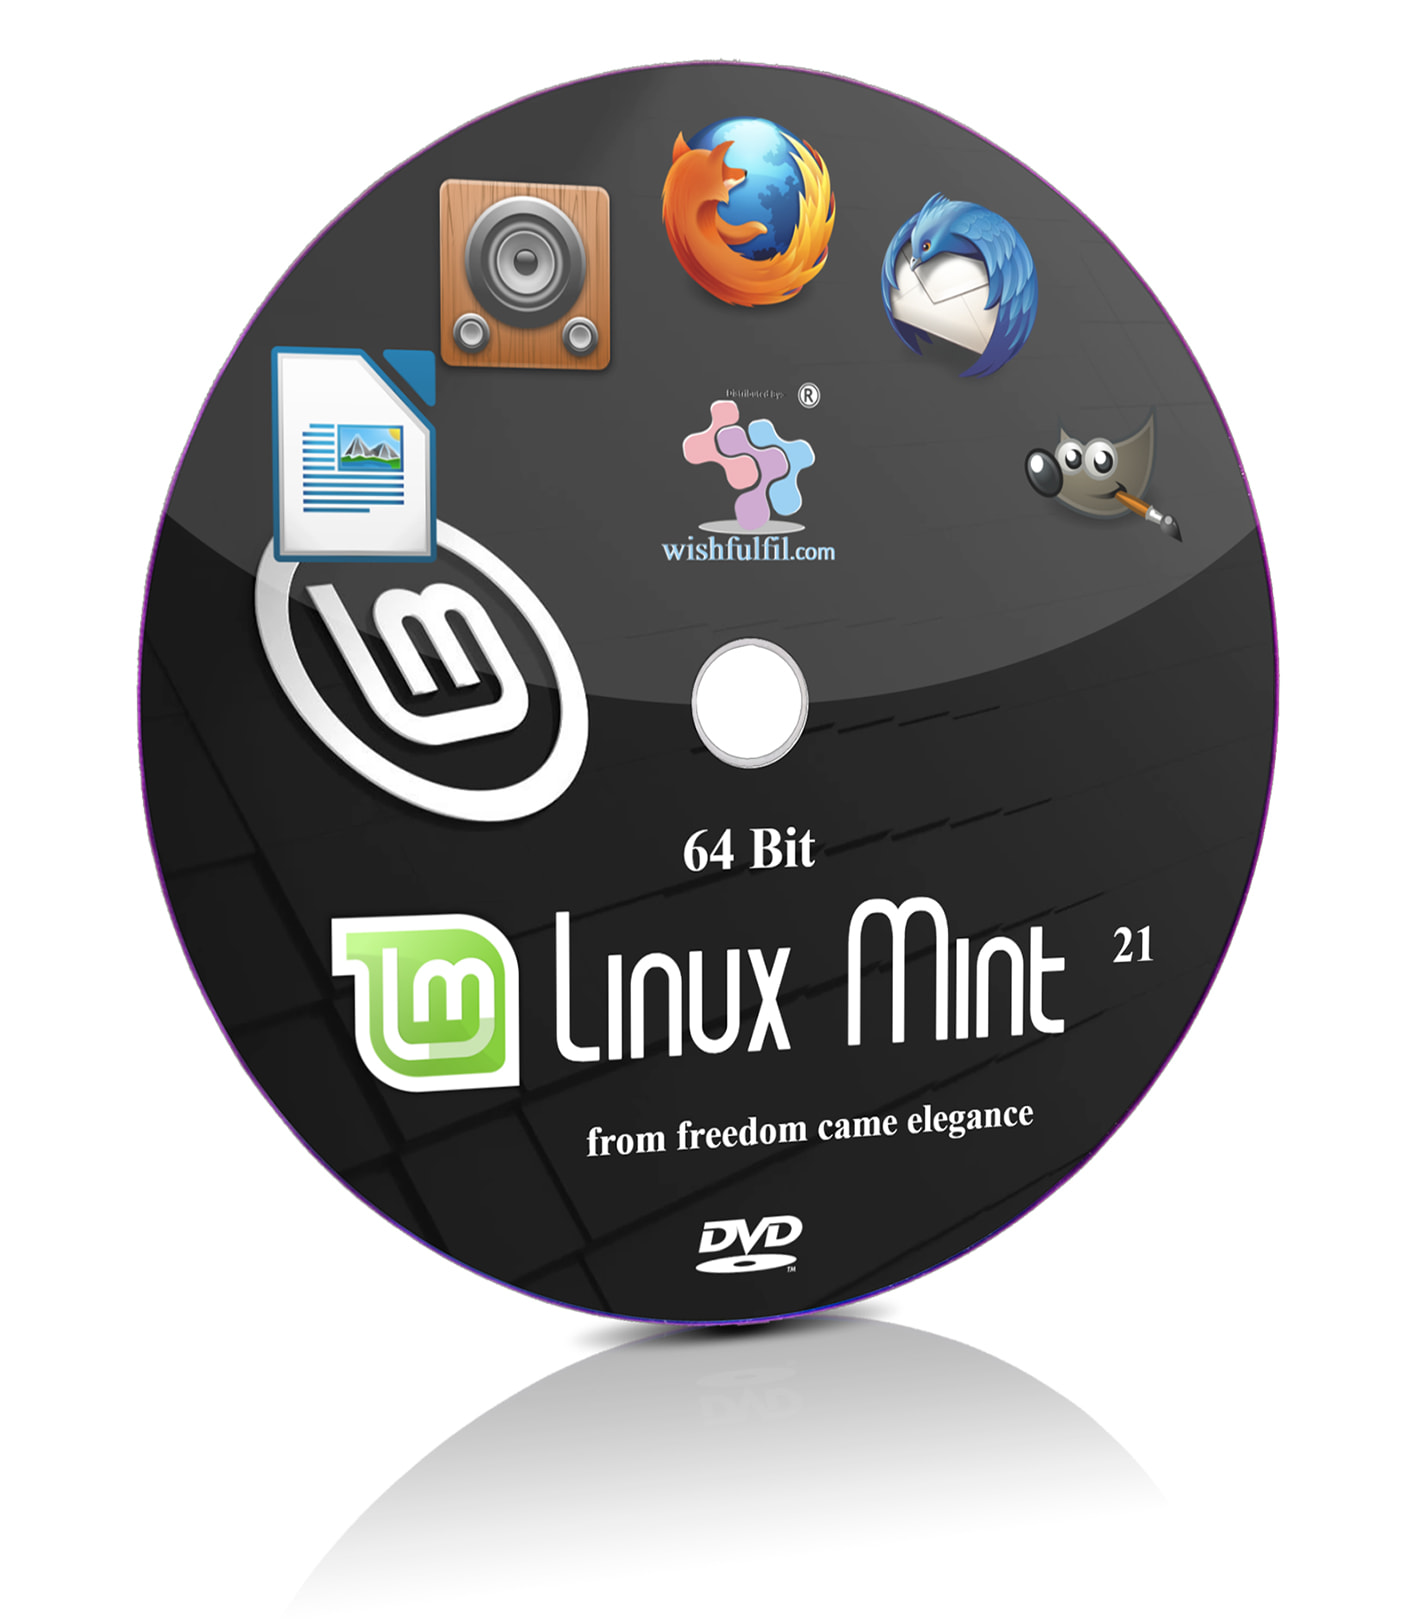 Chicle vídeo En otras palabras Buy Linux Mint 21 Cinnamon 64 Bit Live Bootable Installation DVD -  Wishfulfil.com - Buy Linux CDs, DVDs, USB Flash Drives, Books, Software  Repositories - Your source for open source.